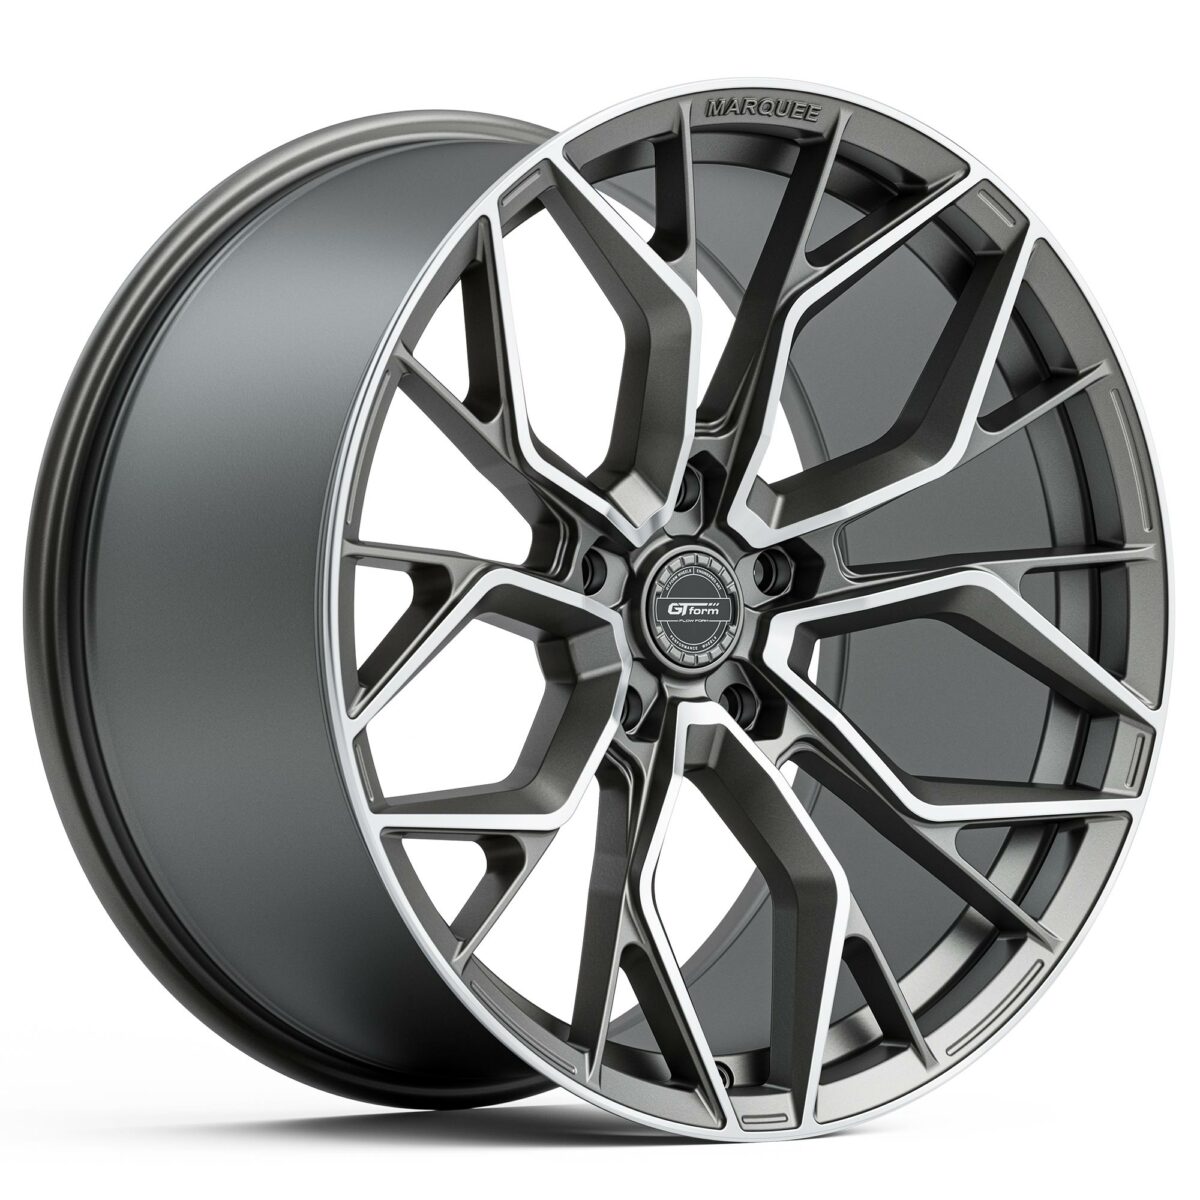 GT Form Marquee Satin Gunmetal Machined Face Staggered Rims 20 22 inch Performance Wheels